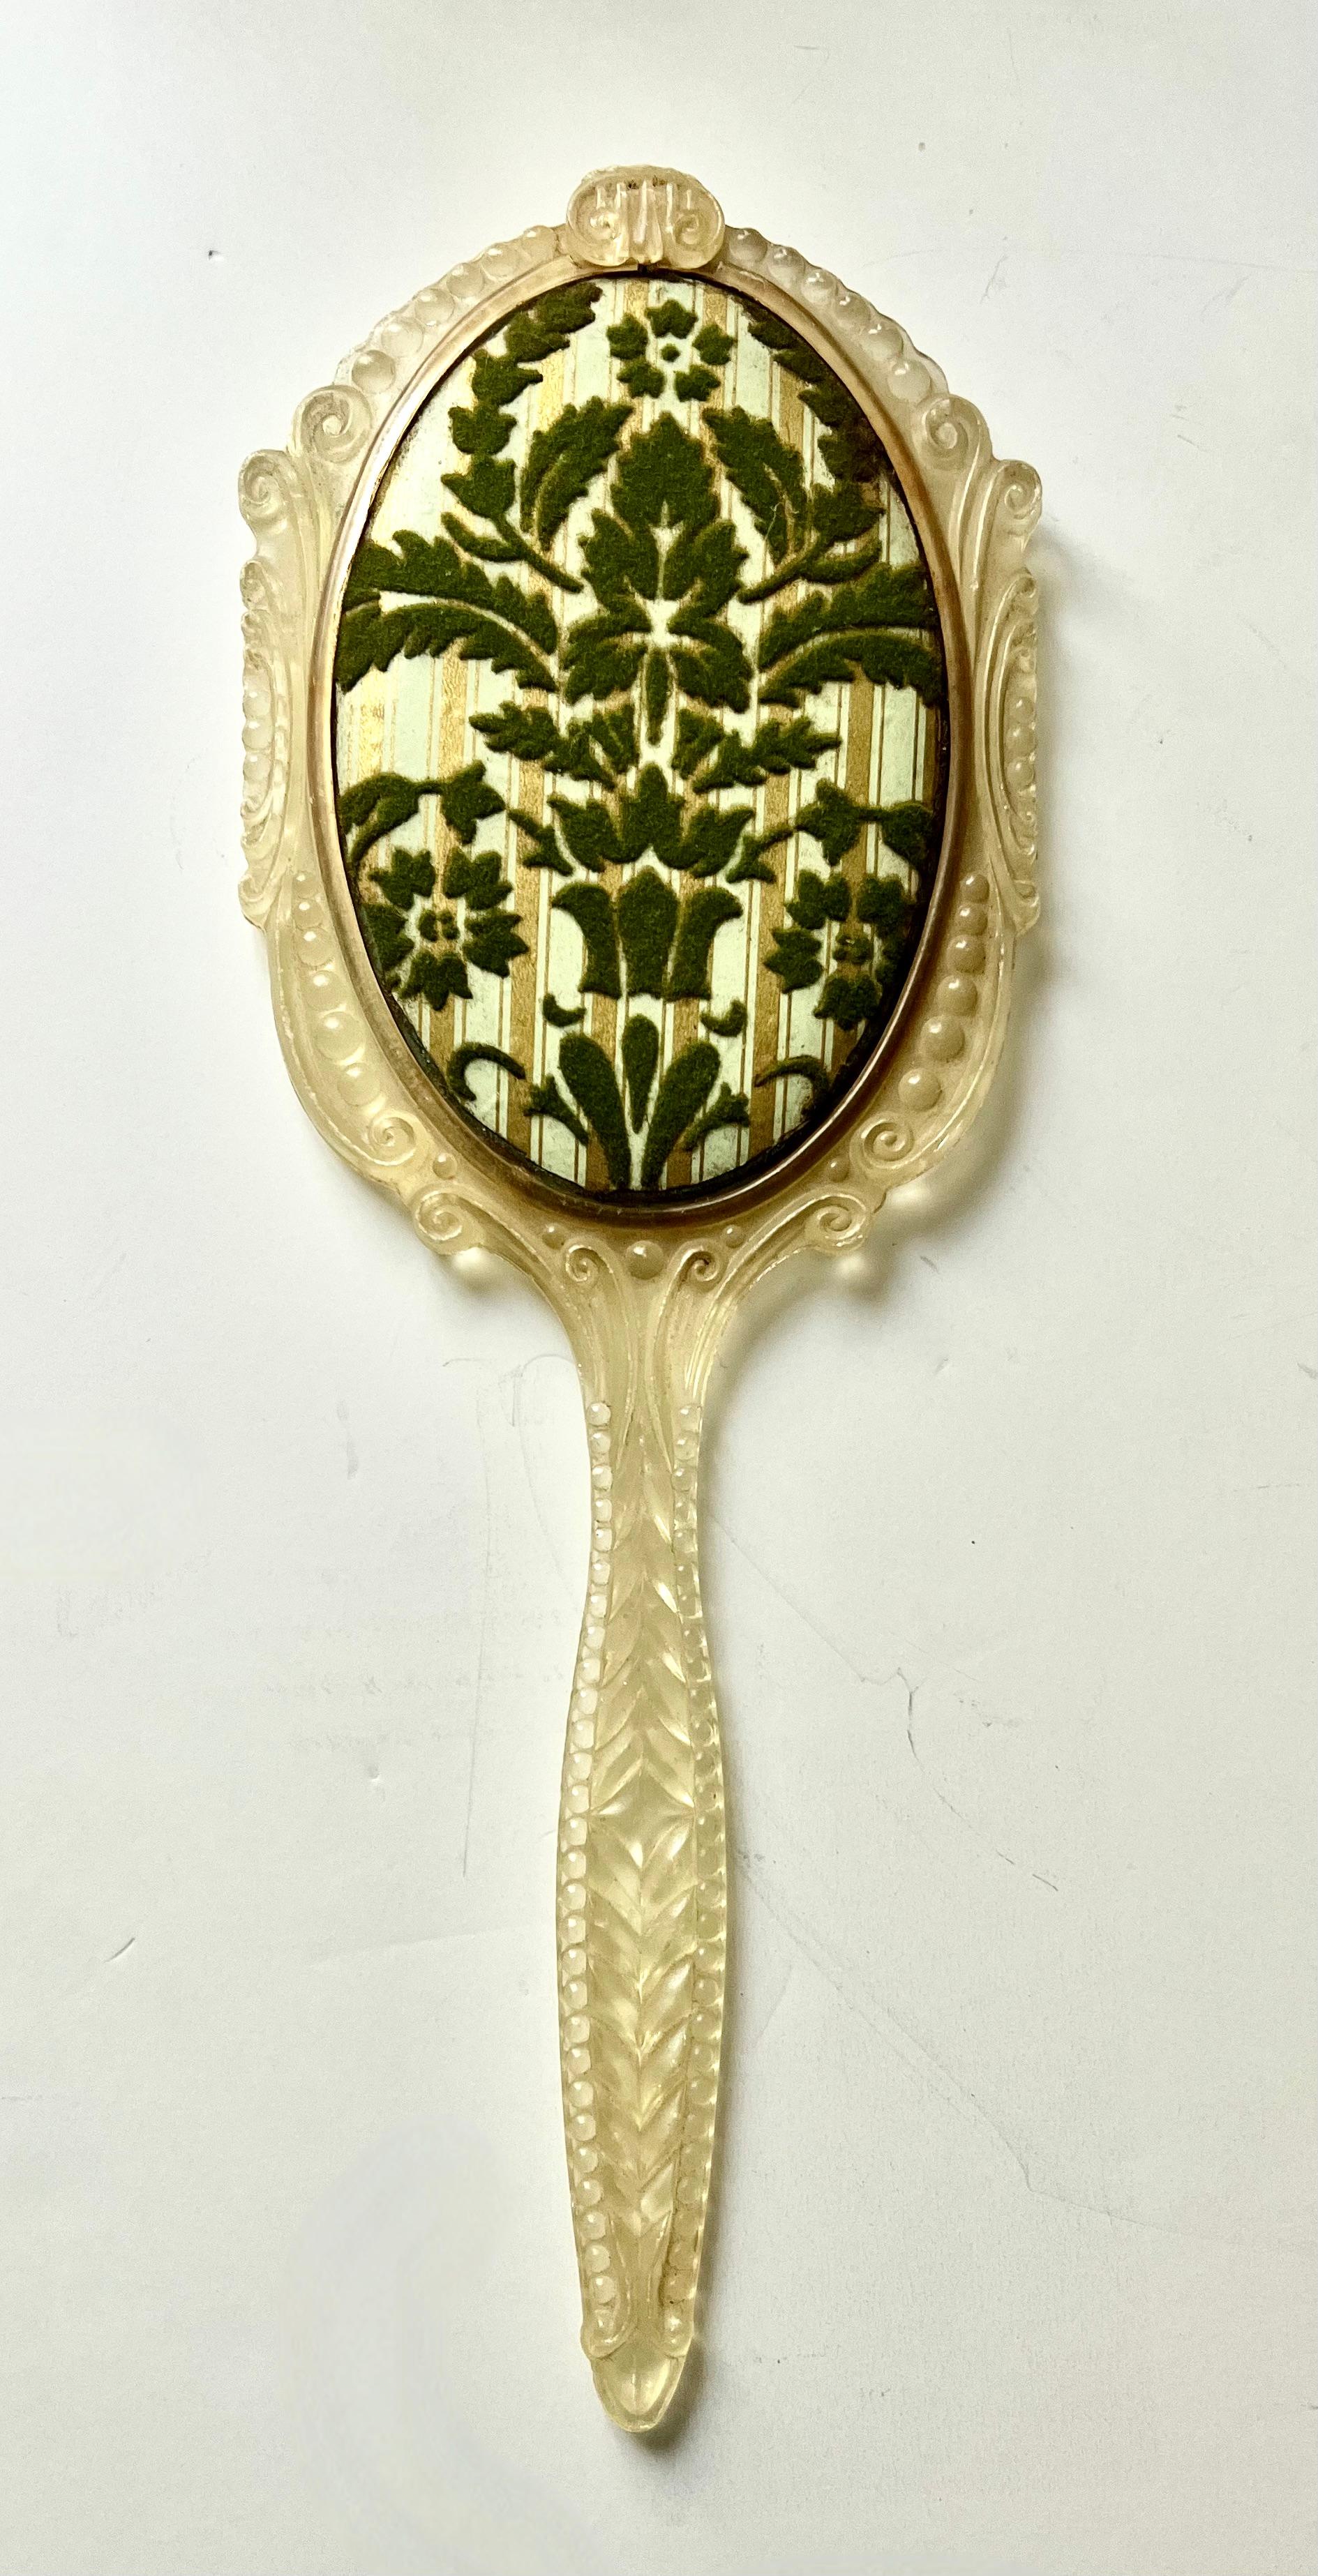 A lovely hand mirror with all the right looks, however, made of materials that aren't top quality.

The piece is made of plastic - ornate as it might be, it has yellowed a bit, but something about this mirror is quite charming... it's stood the test